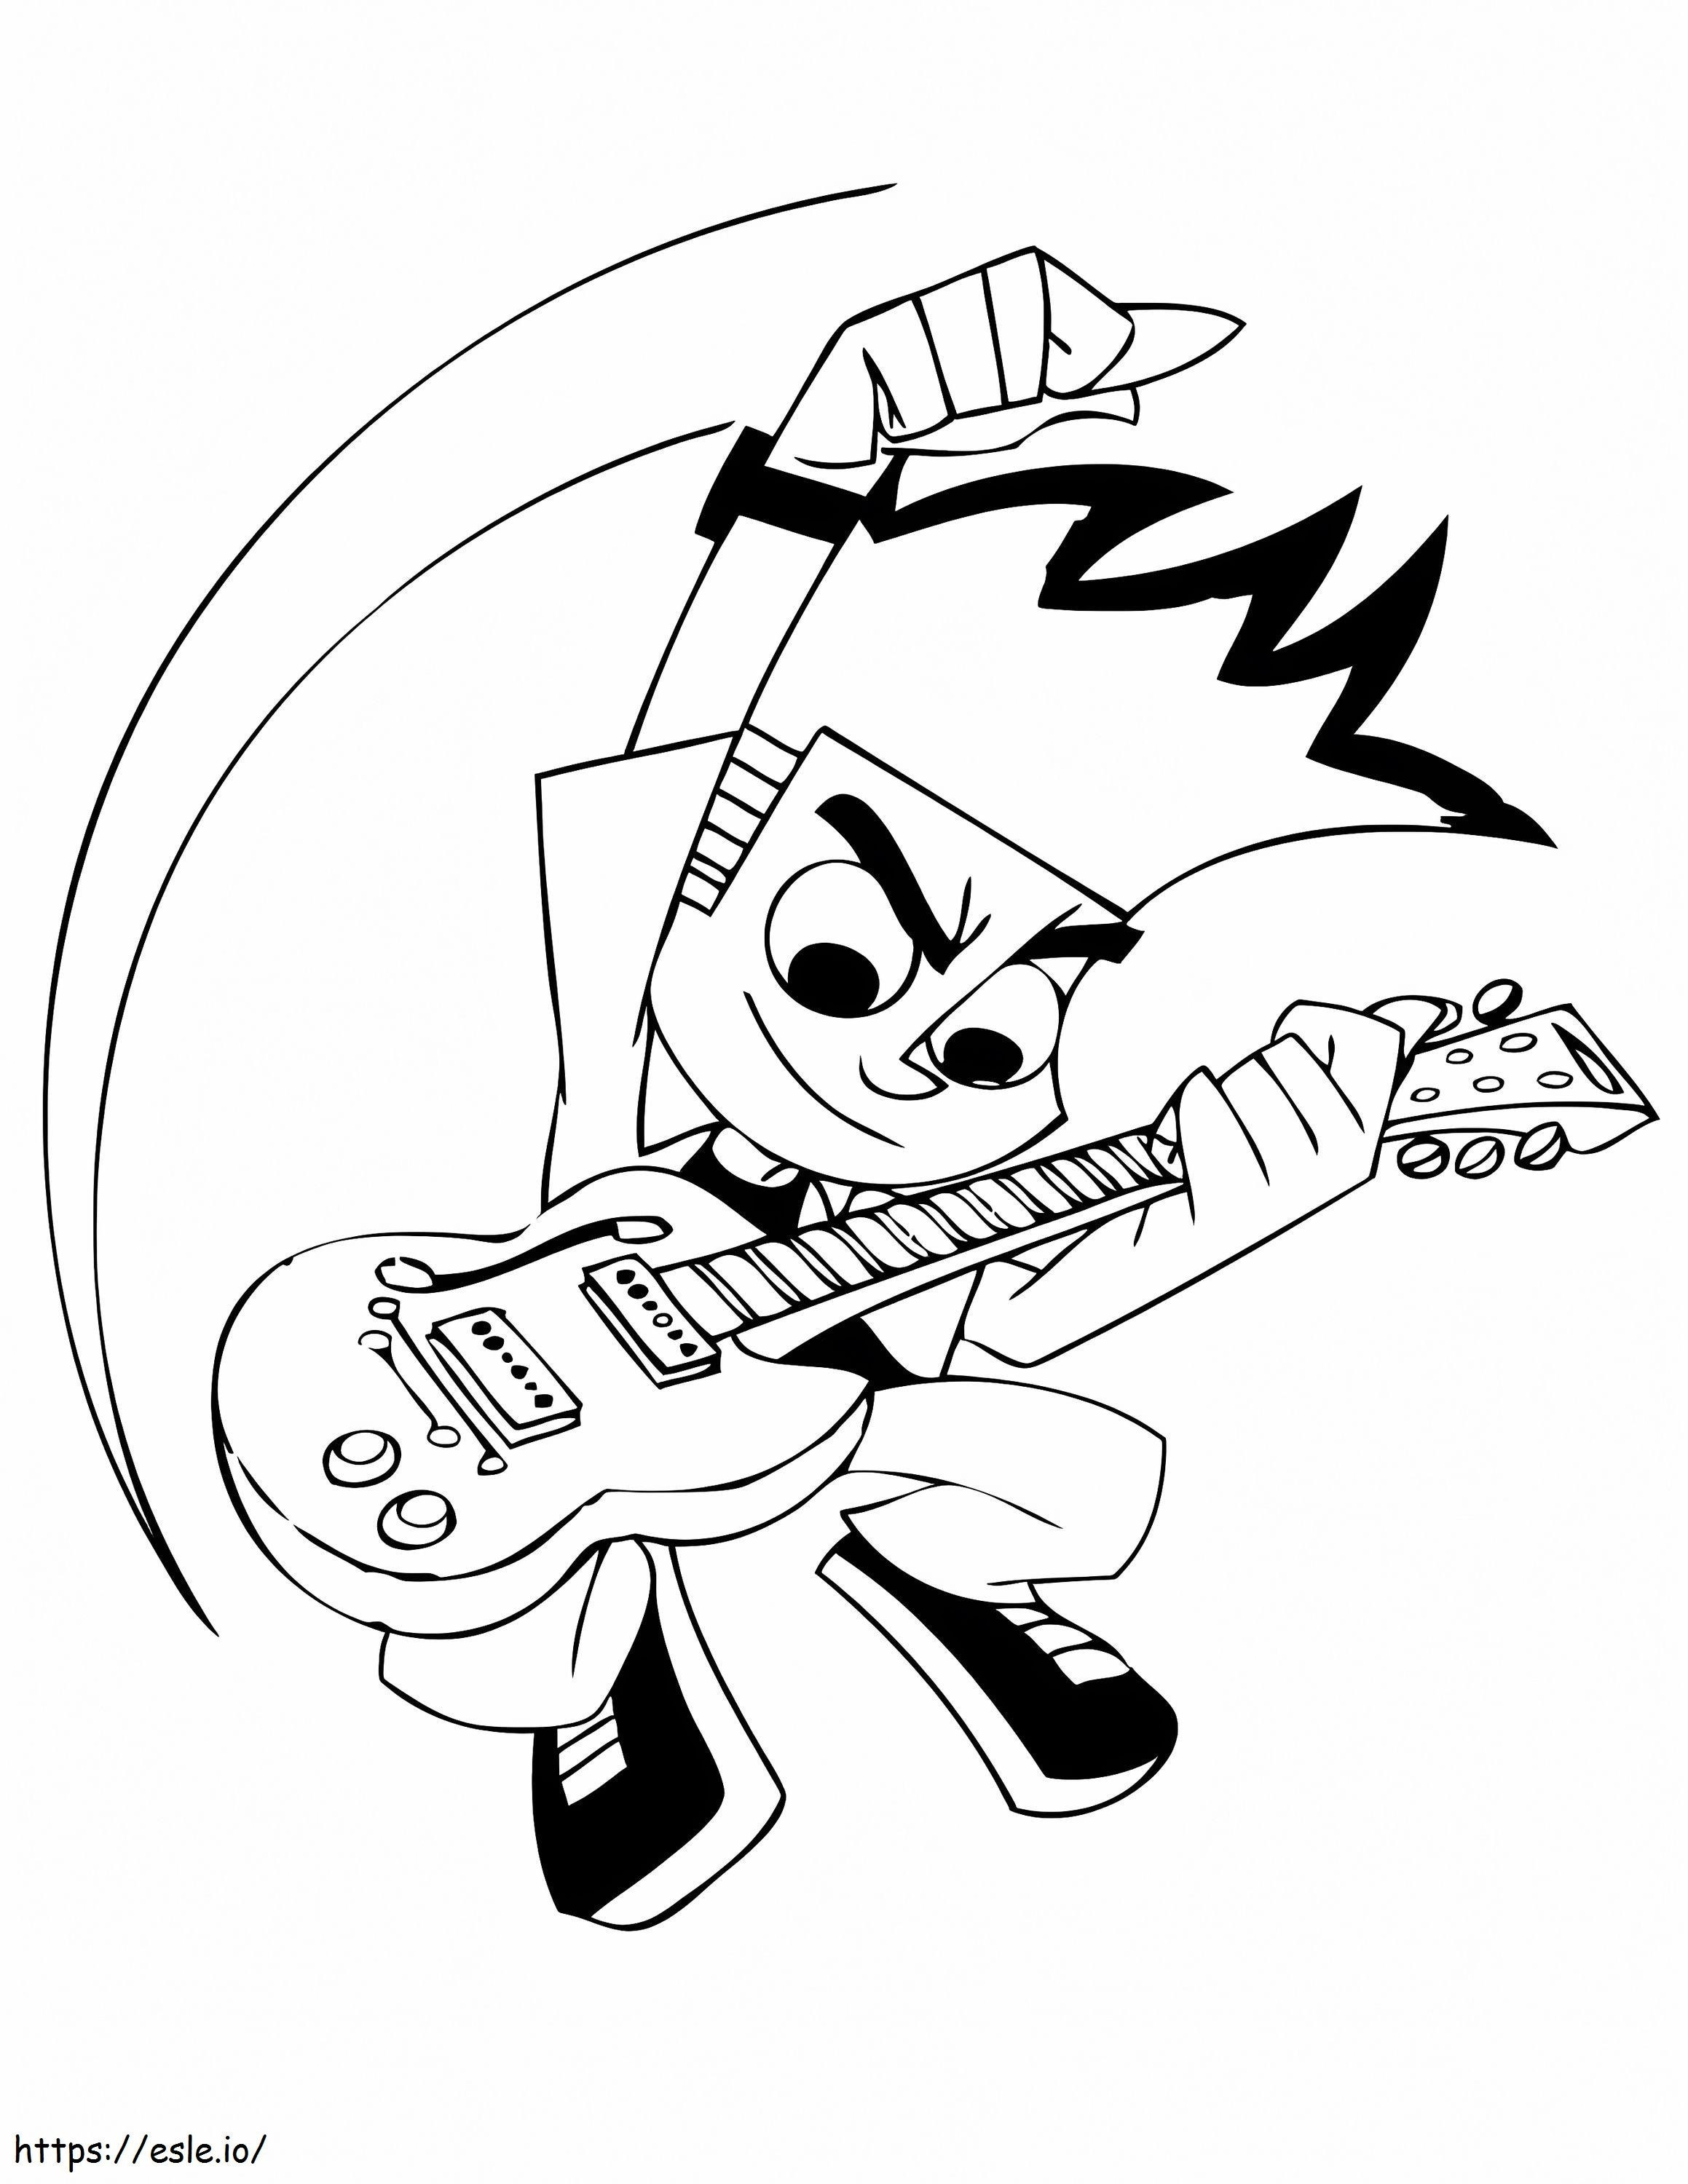 Johnny Test Playing Guitar coloring page